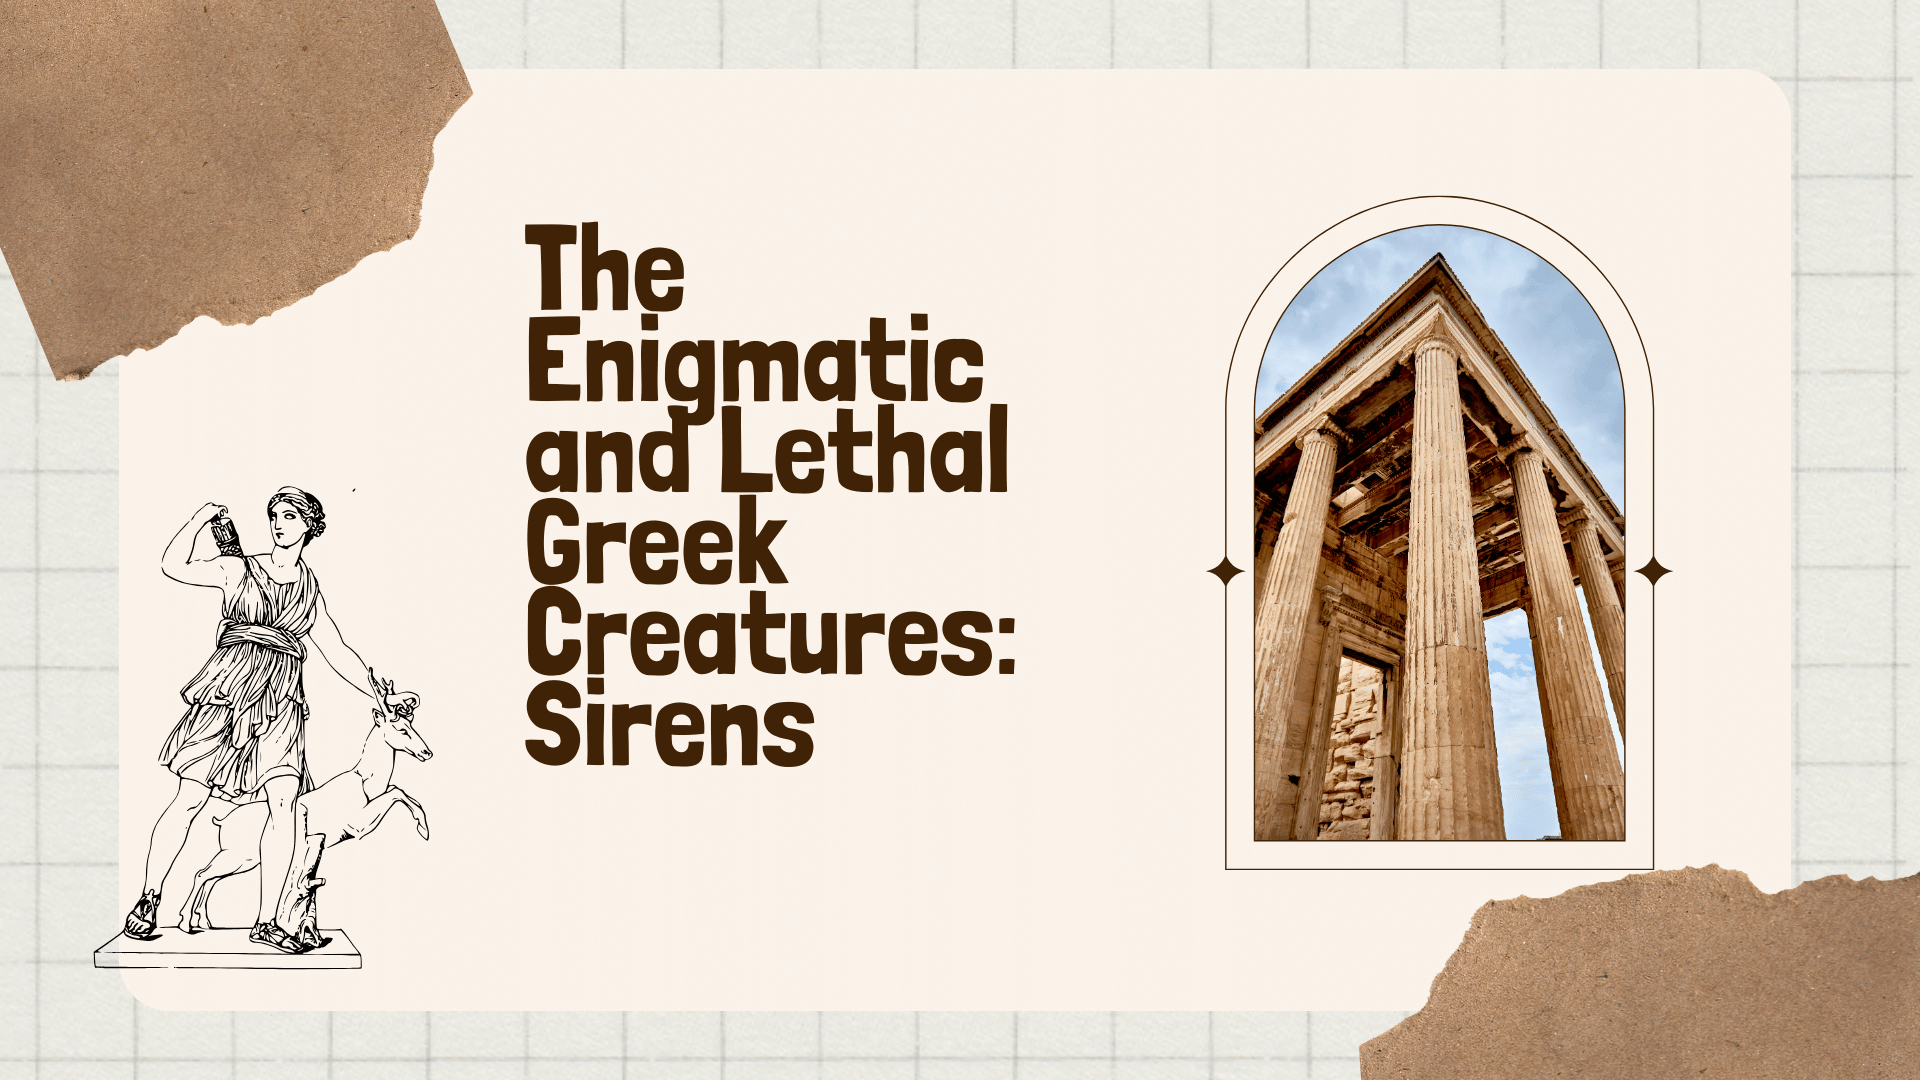 The Enigmatic and Lethal Greek Creatures: Sirens